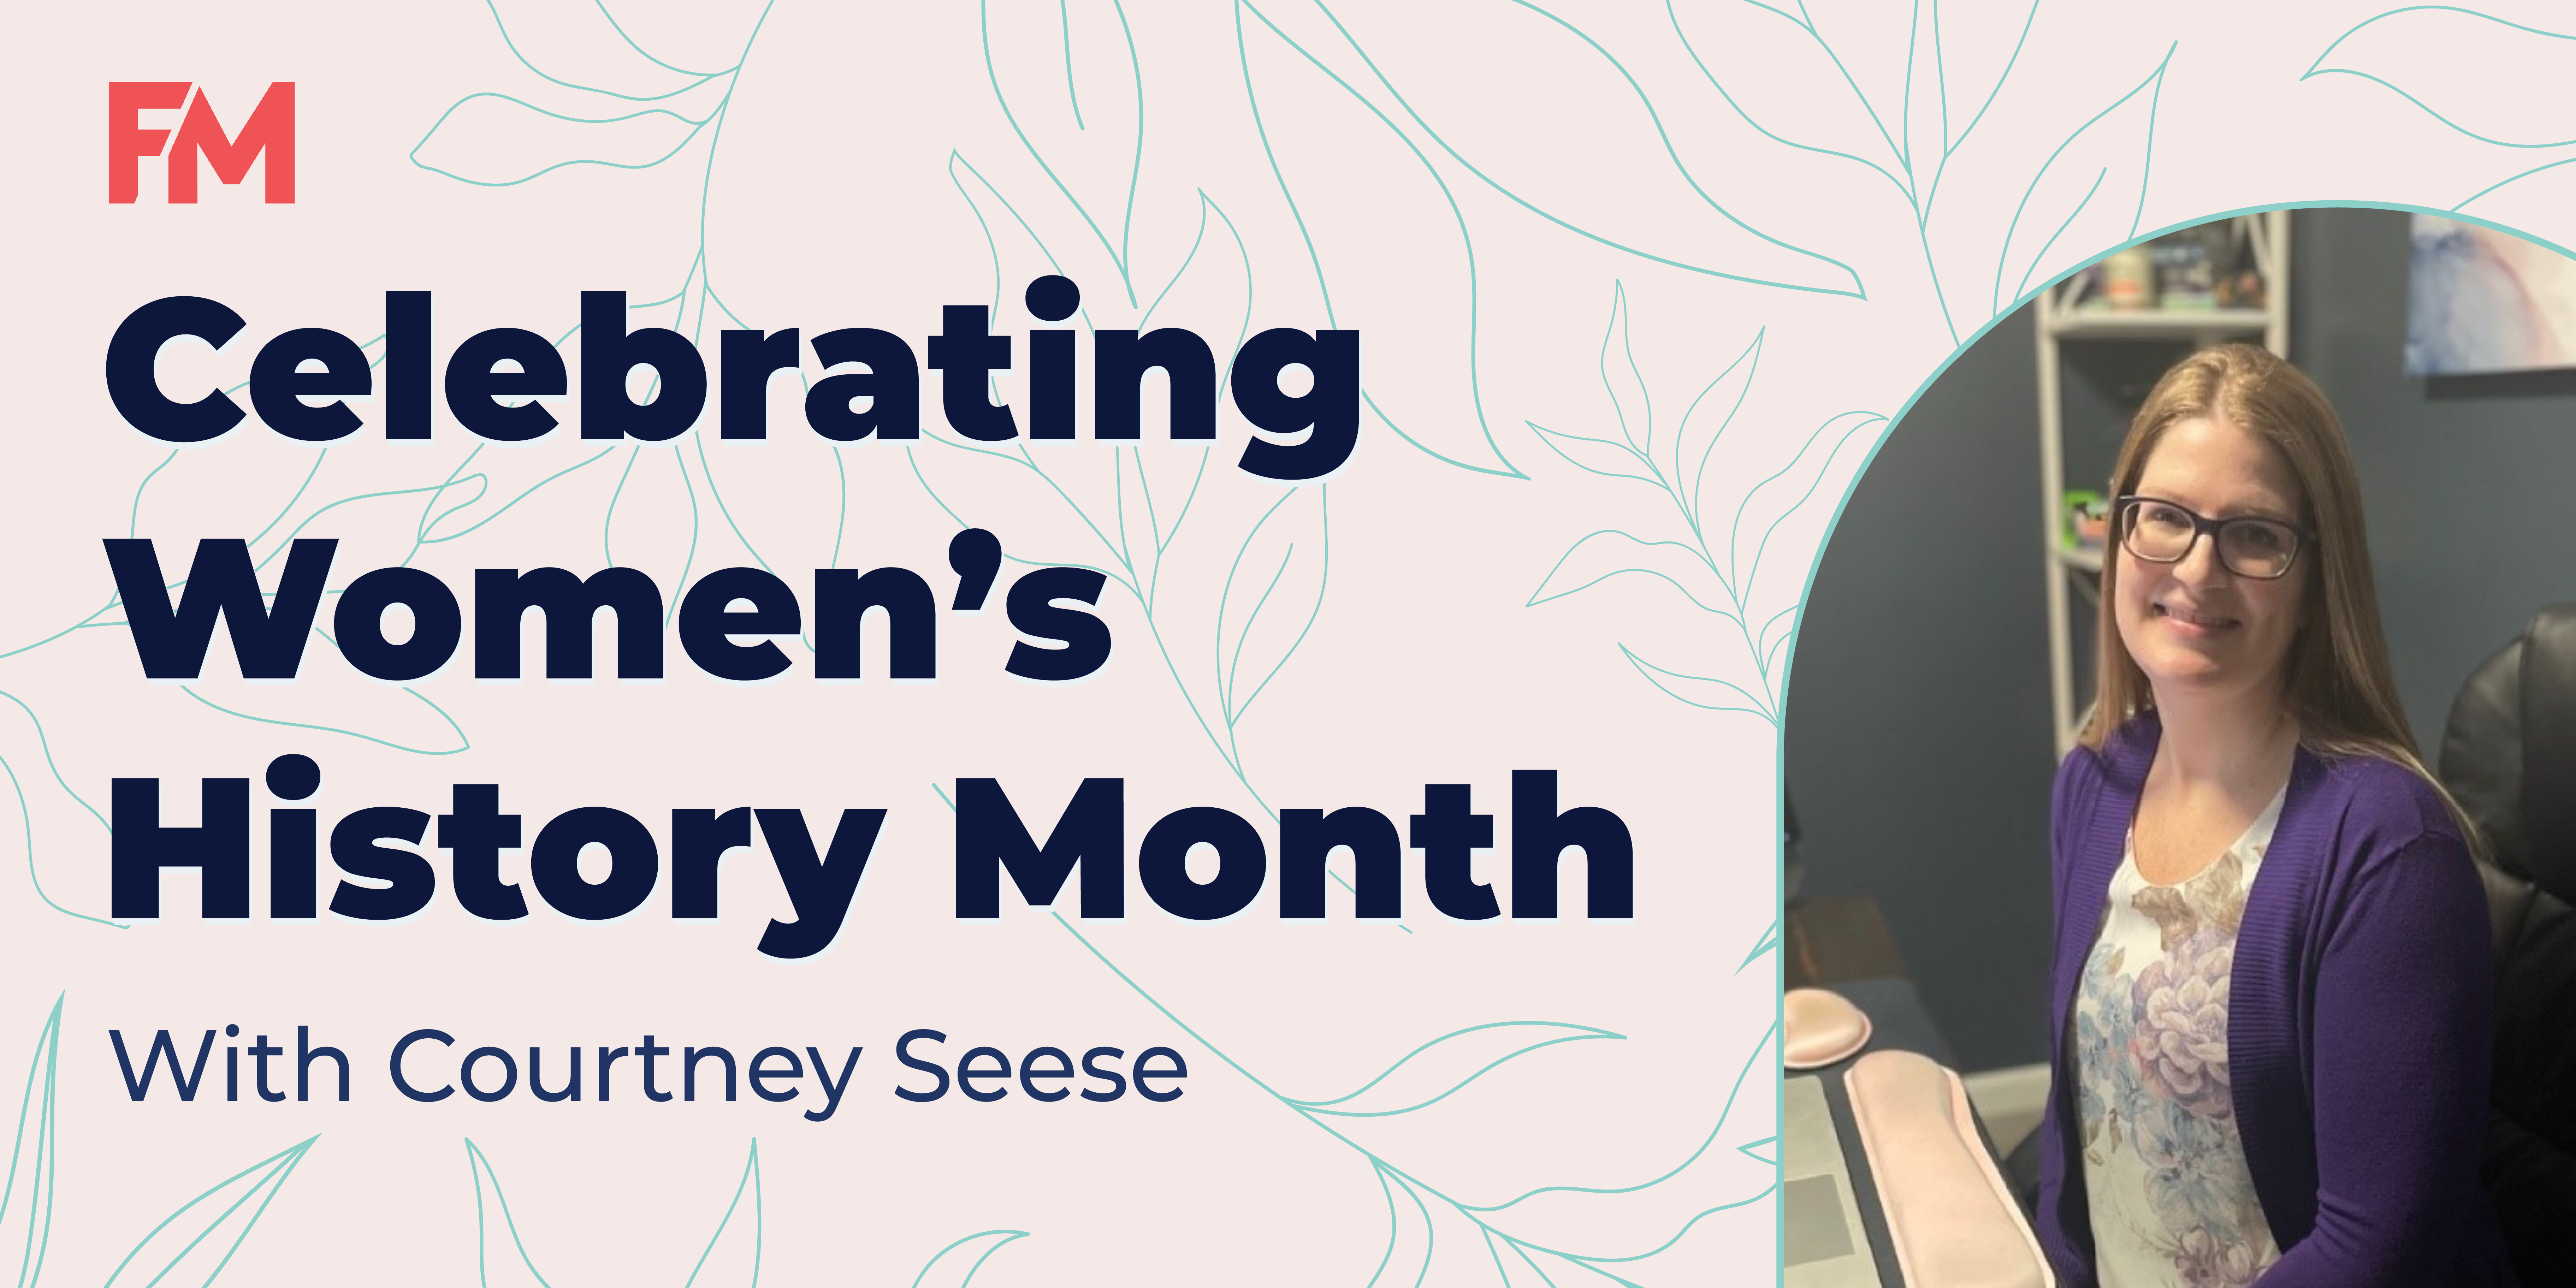 Women’s History Month - Courtney Seese